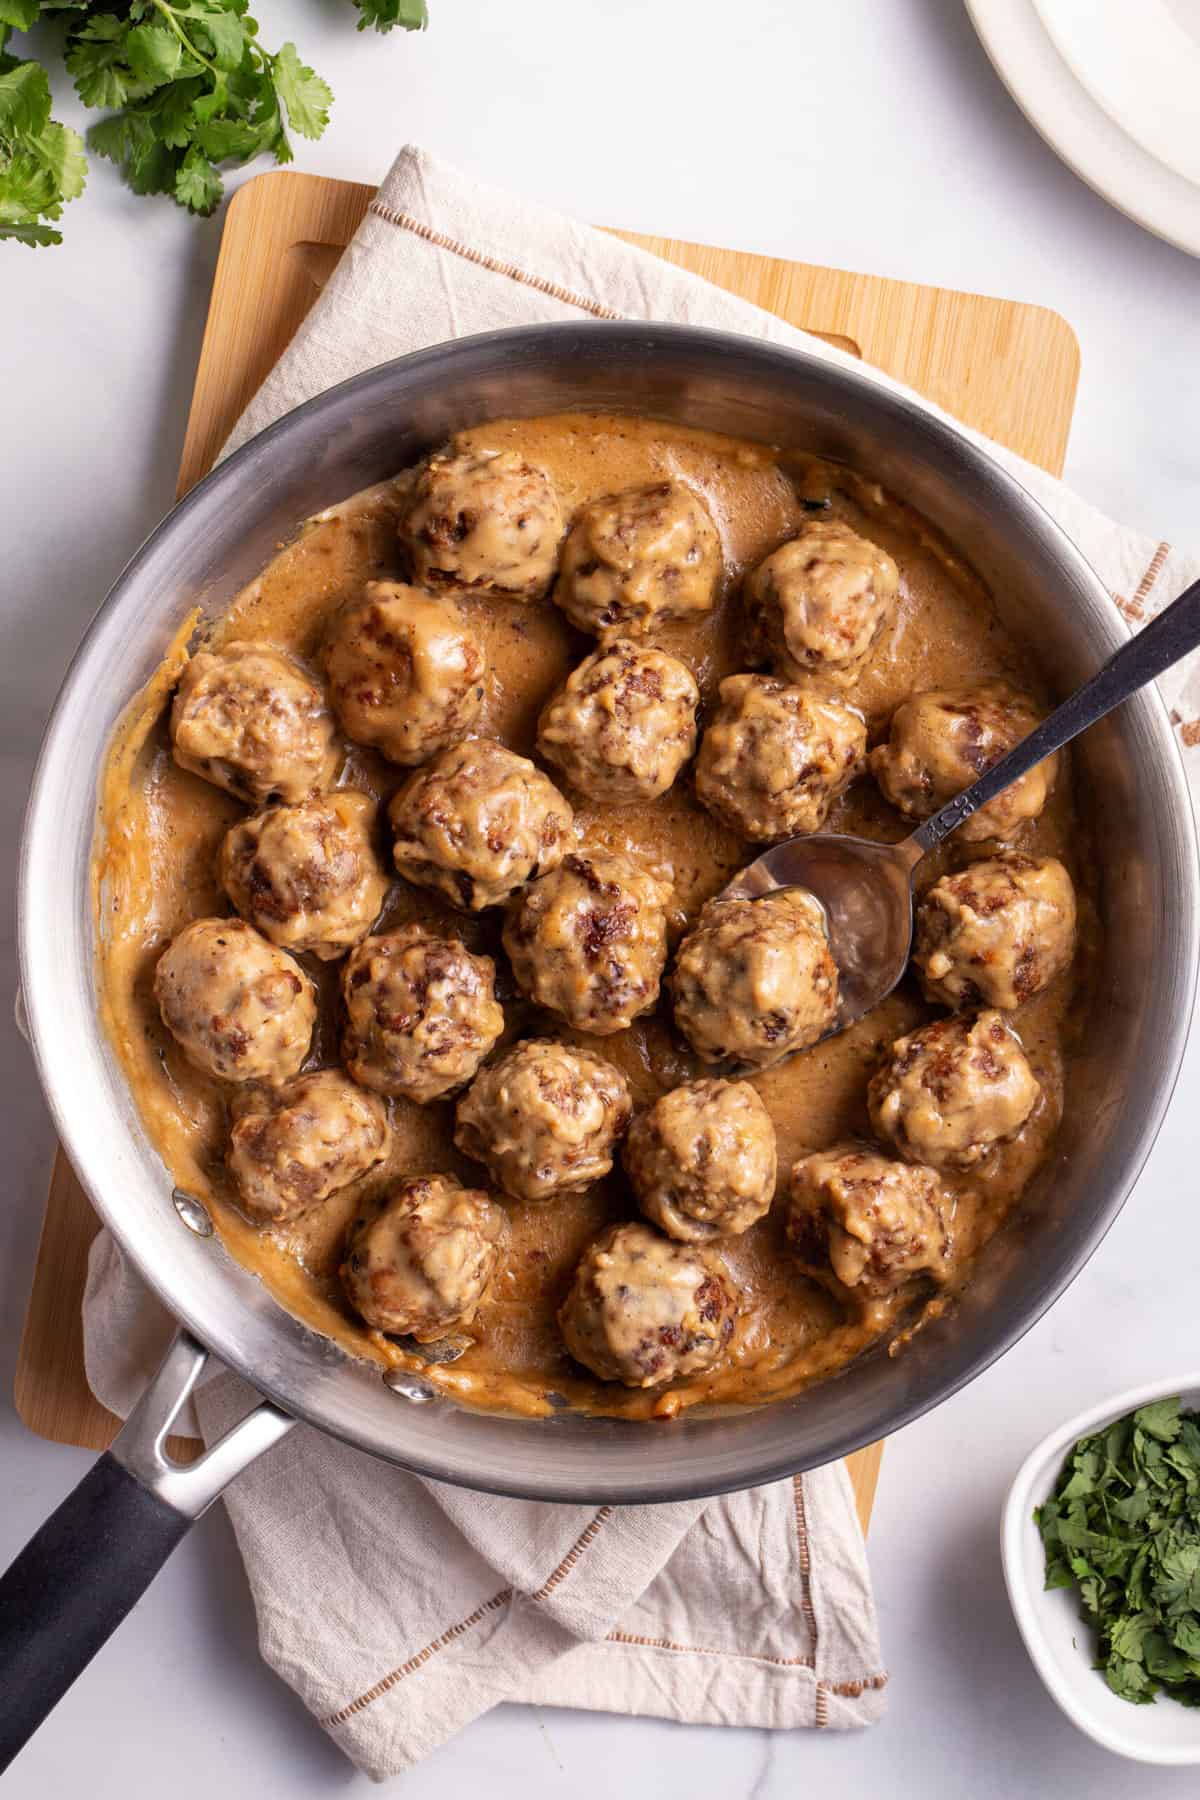 top down image of Swedish meatballs with gravy served in a stainless steel pan.